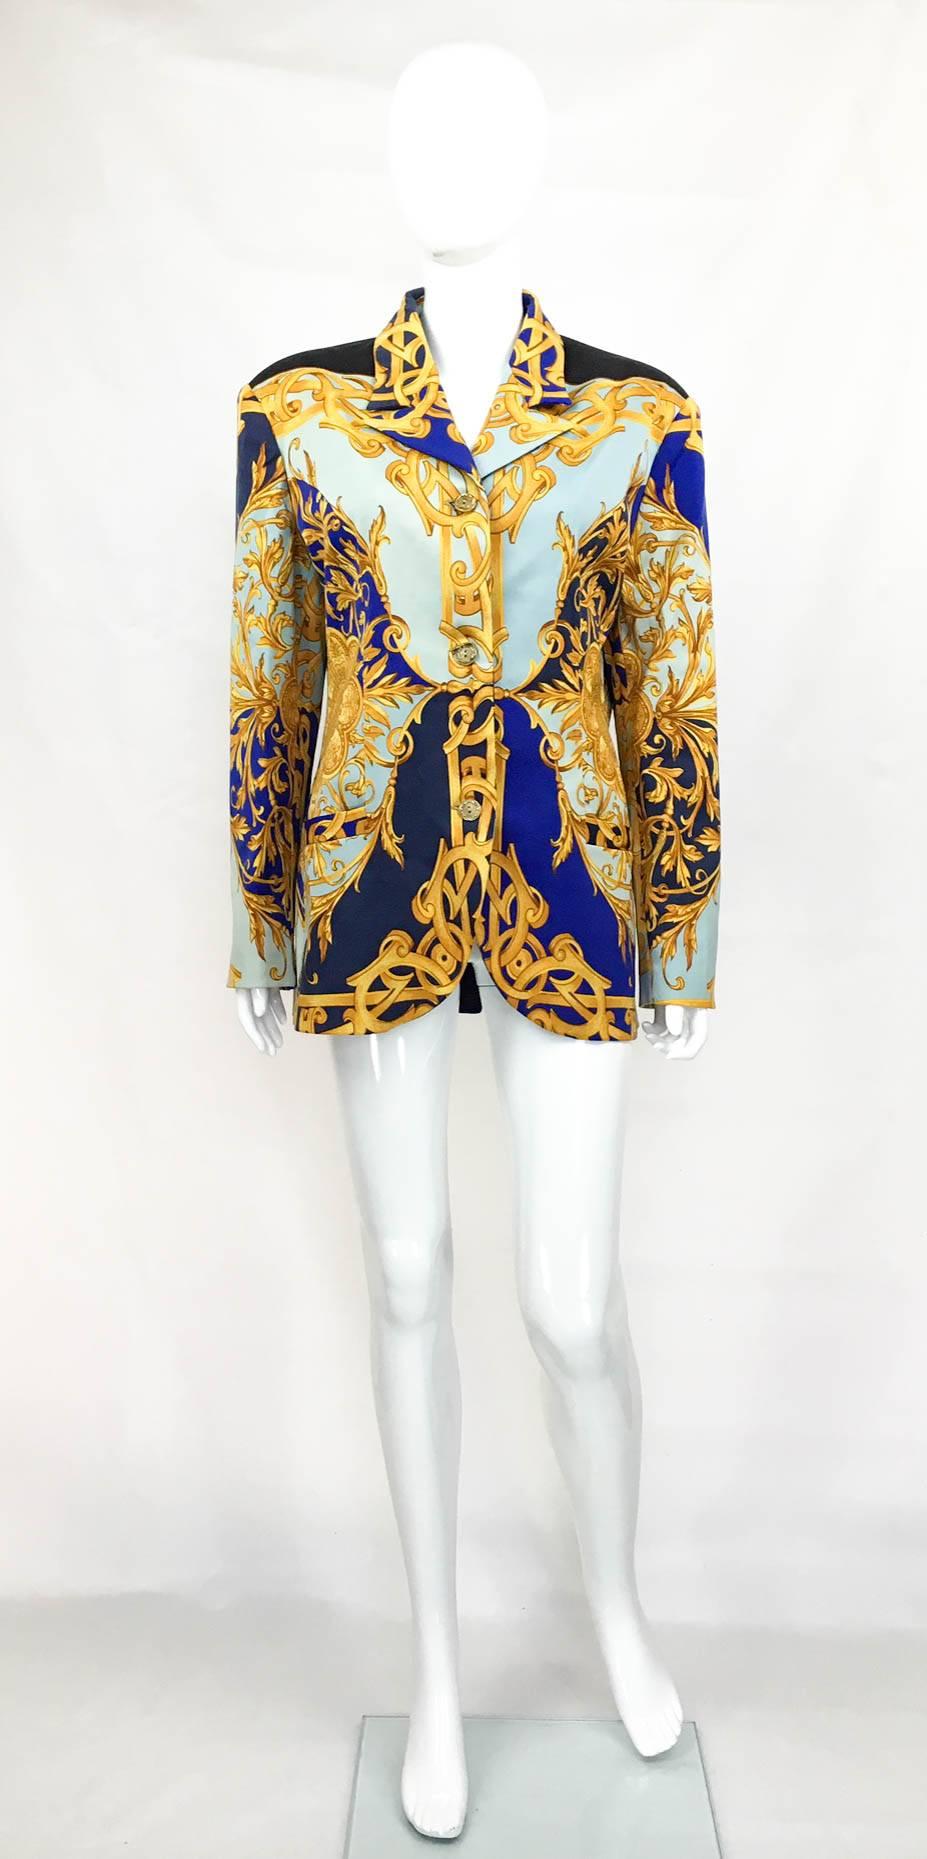 Vintage Versace Baroque Print Jacket. This stunning Versace jacket features 3 elaborate old gold-toned buttons down the front and 2 on the back, as well as two front pockets. The waist is slightly cinched in. Fully lined. The pattern features